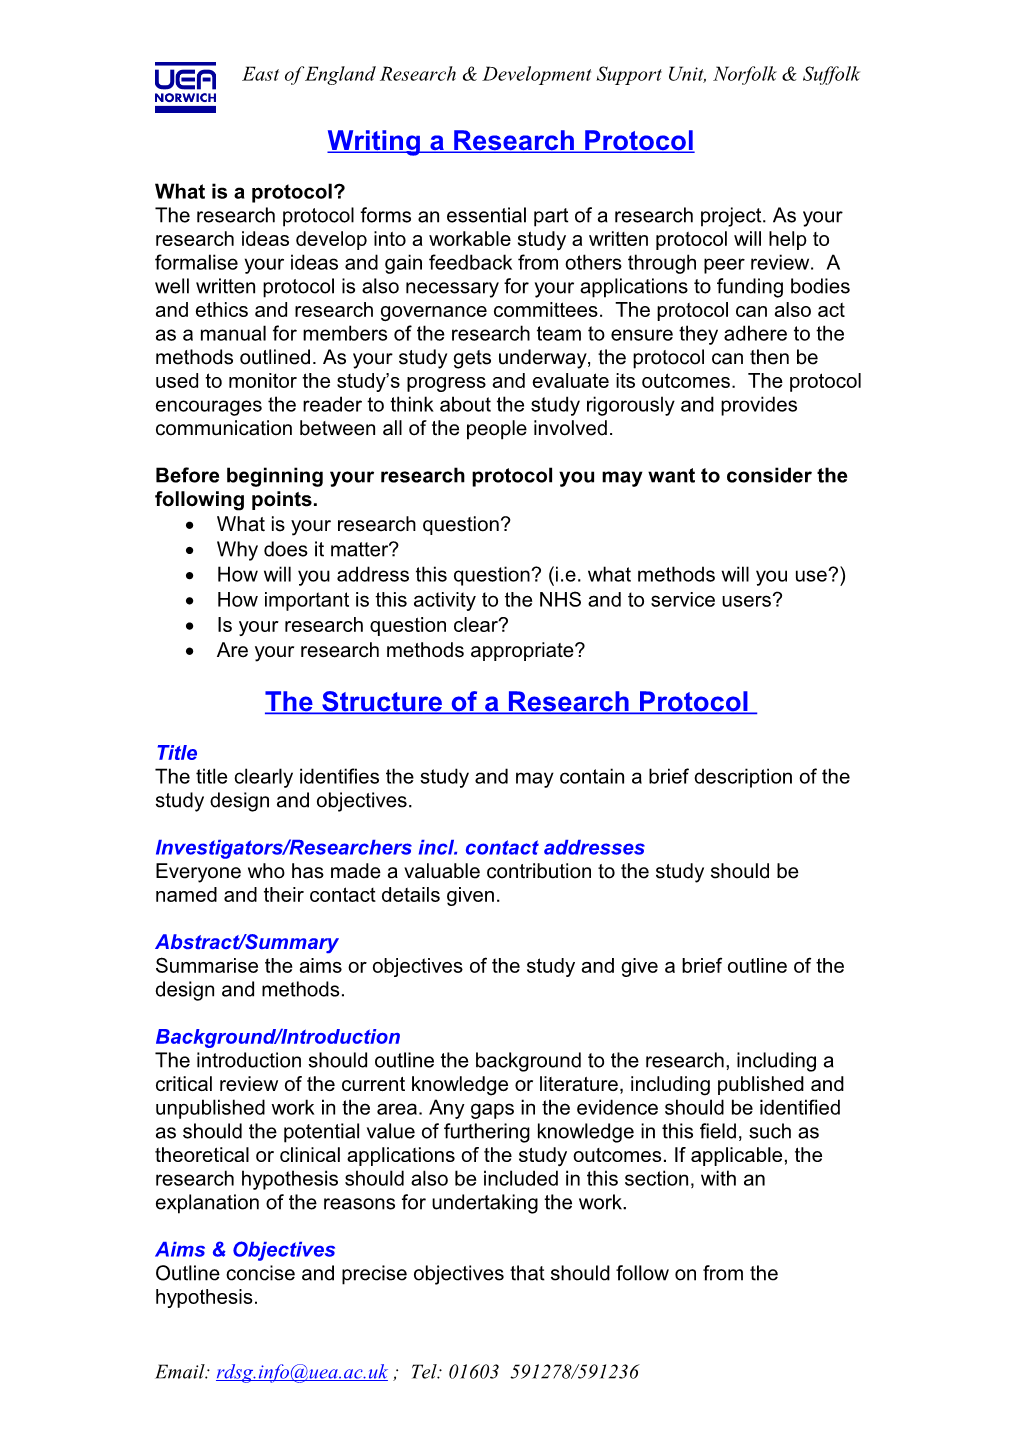 Writing a Research Protocol